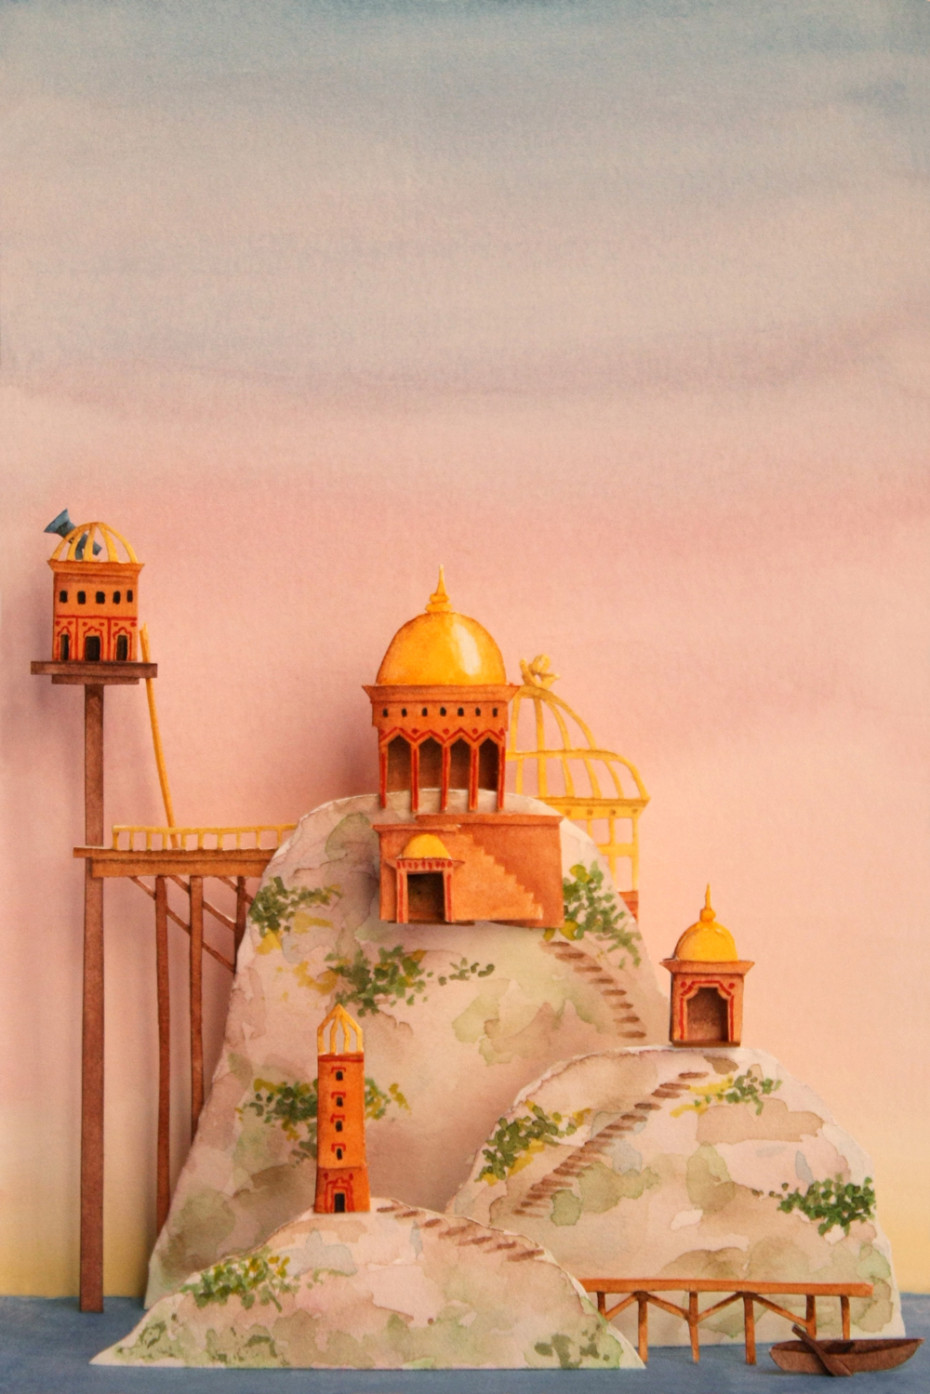 Wonderful Tiny Hand-Painted Wes Anderson Sets 11